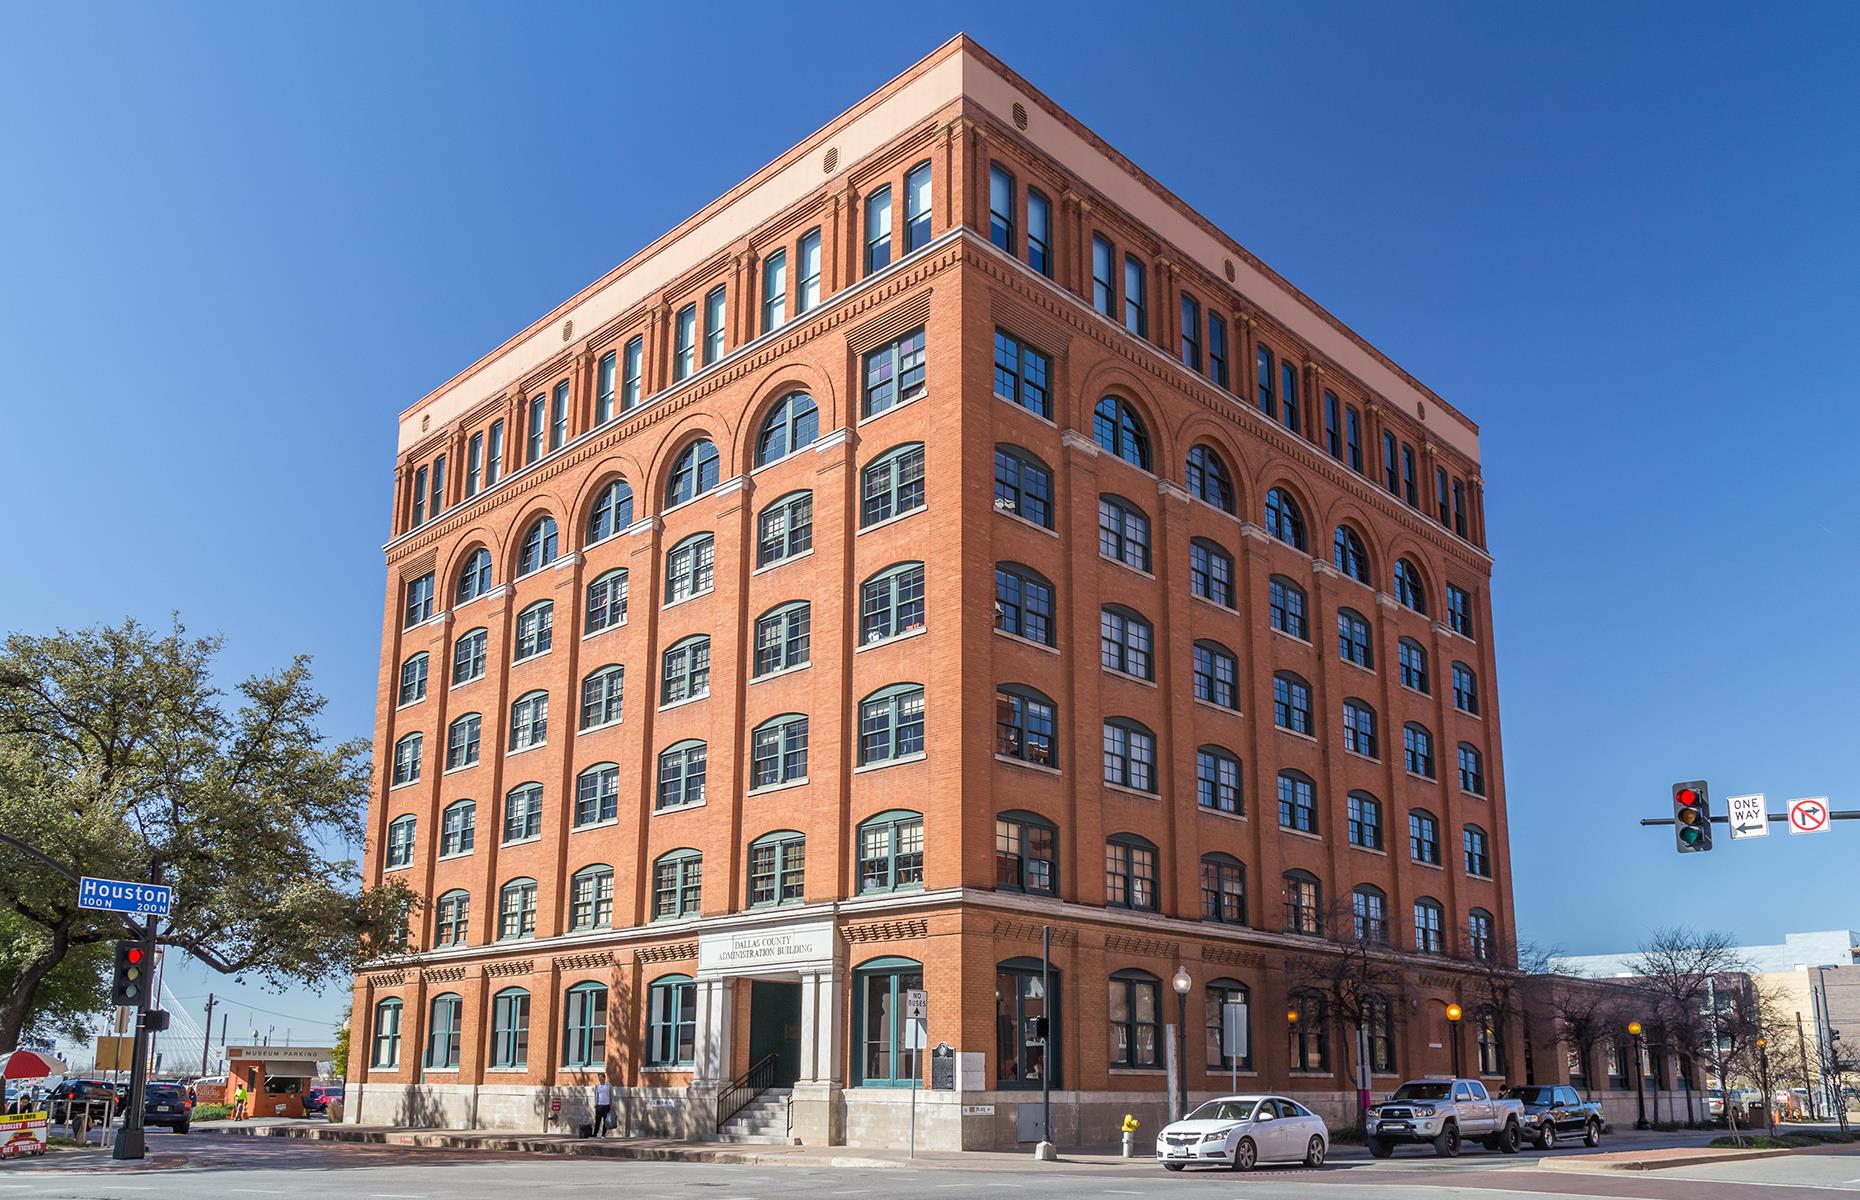 <p>If you want to learn more about the life and assassination of President John F. Kennedy, take a trip to the <a href="https://www.jfk.org/">Sixth Floor Museum</a> in Dallas. Located in the old Texas School Book Depository building, where a sniper’s perch and rifle were found on the sixth floor after President Kennedy was assassinated in Dealey Plaza, the museum chronicles the life and legacy of the president through the lens of his assassination in 1963, with historic images and news footage.</p>